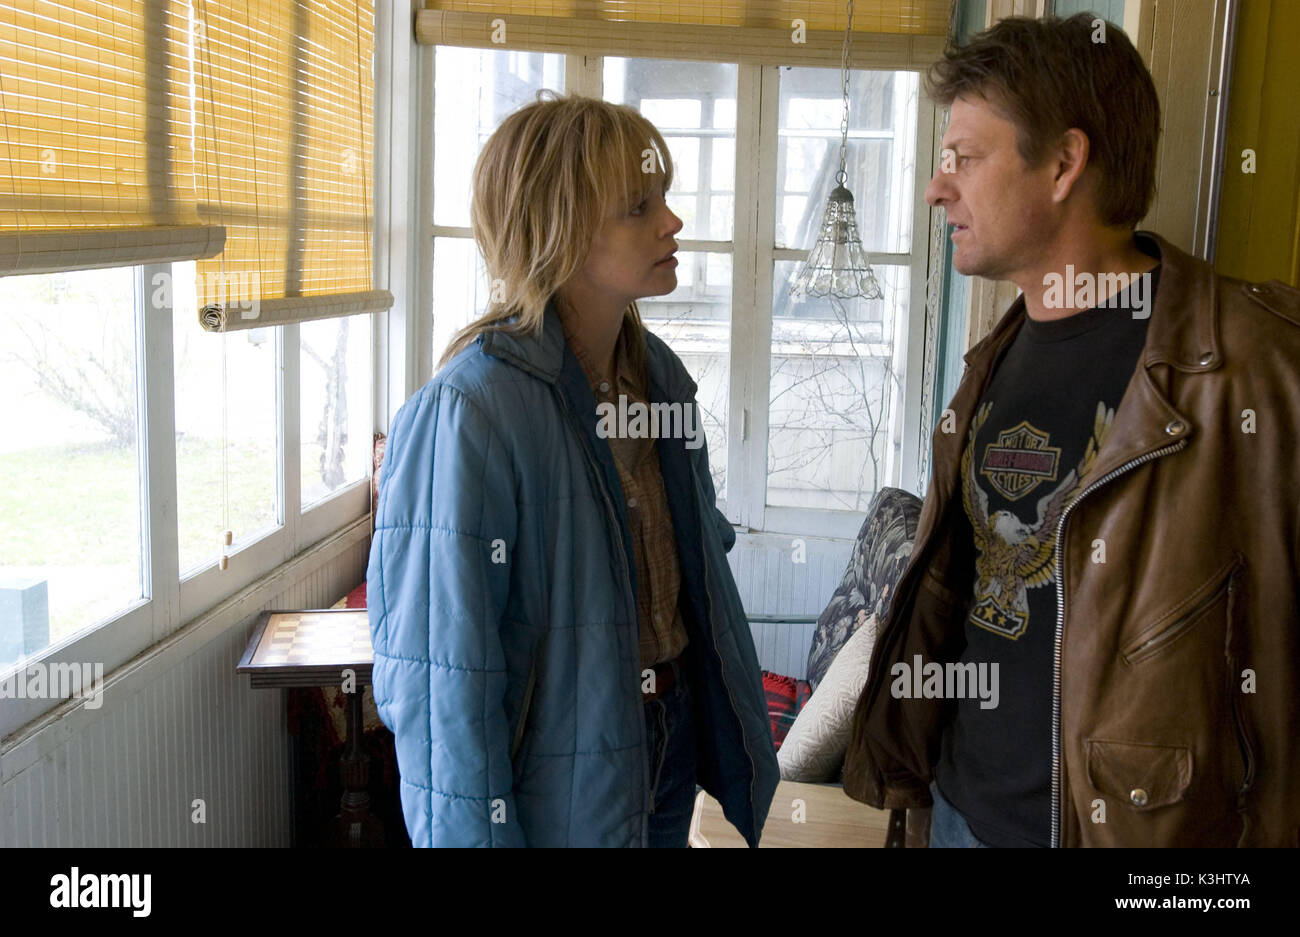 CHARLIZE THERON as Josey Aimes and SEAN BEAN as Kyle in Warner Bros. Pictures' drama, North Country. FRANCES McDORMAND also stars. PHOTOGRAPHS TO BE USED SOLELY FOR ADVERTISING, PROMOTION, PUBLICITY OR REVIEWS OF THIS SPECIFIC MOTION PICTURE AND TO REMAIN THE PROPERTY OF THE STUDIO. NOT FOR SALE OR REDISTRIBUTION. NORTH COUNTRY CHARLIZE THERON as Josey Aimes and SEAN BEAN as Kyle CHARLIZE THERON as Josey Aimes and SEAN BEAN as Kyle in Warner Bros. Pictures drama, North Country. FRANCES McDORMAND also stars. PHOTOGRAPHS TO BE USED SOLELY FOR ADVERTISING, PROMOTION, PUBLIC Stock Photo